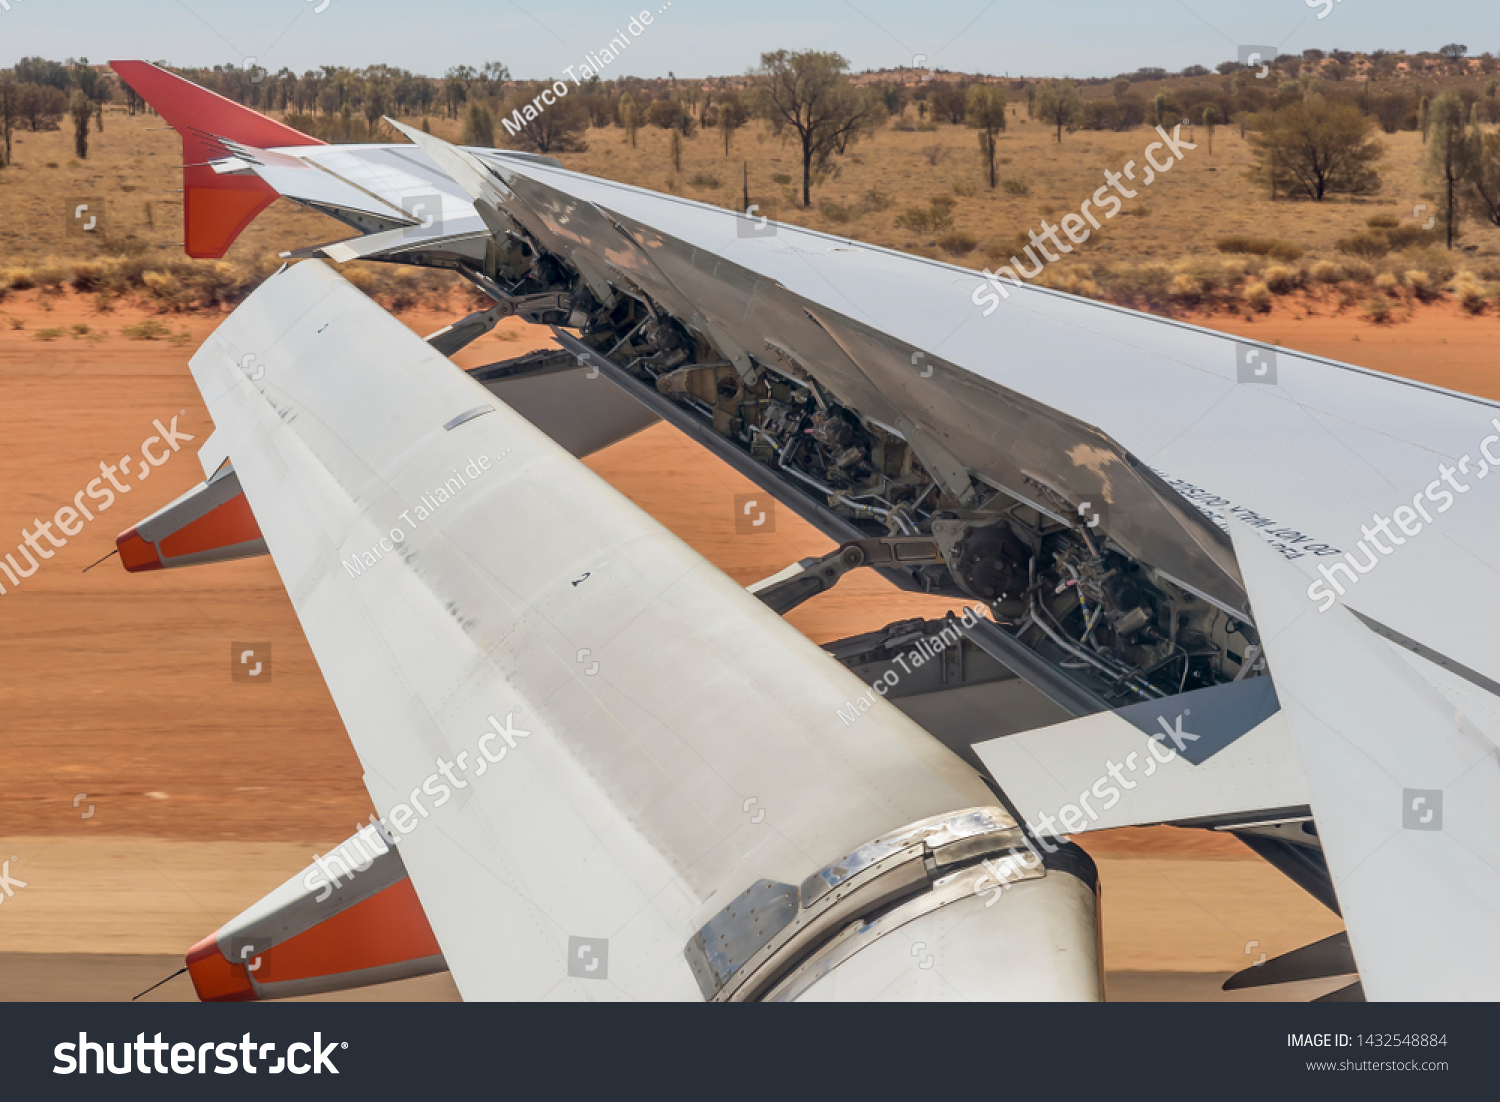 Airplane activates ground spoilers as it lands at the Ayers Rock airport in Australia #1432548884